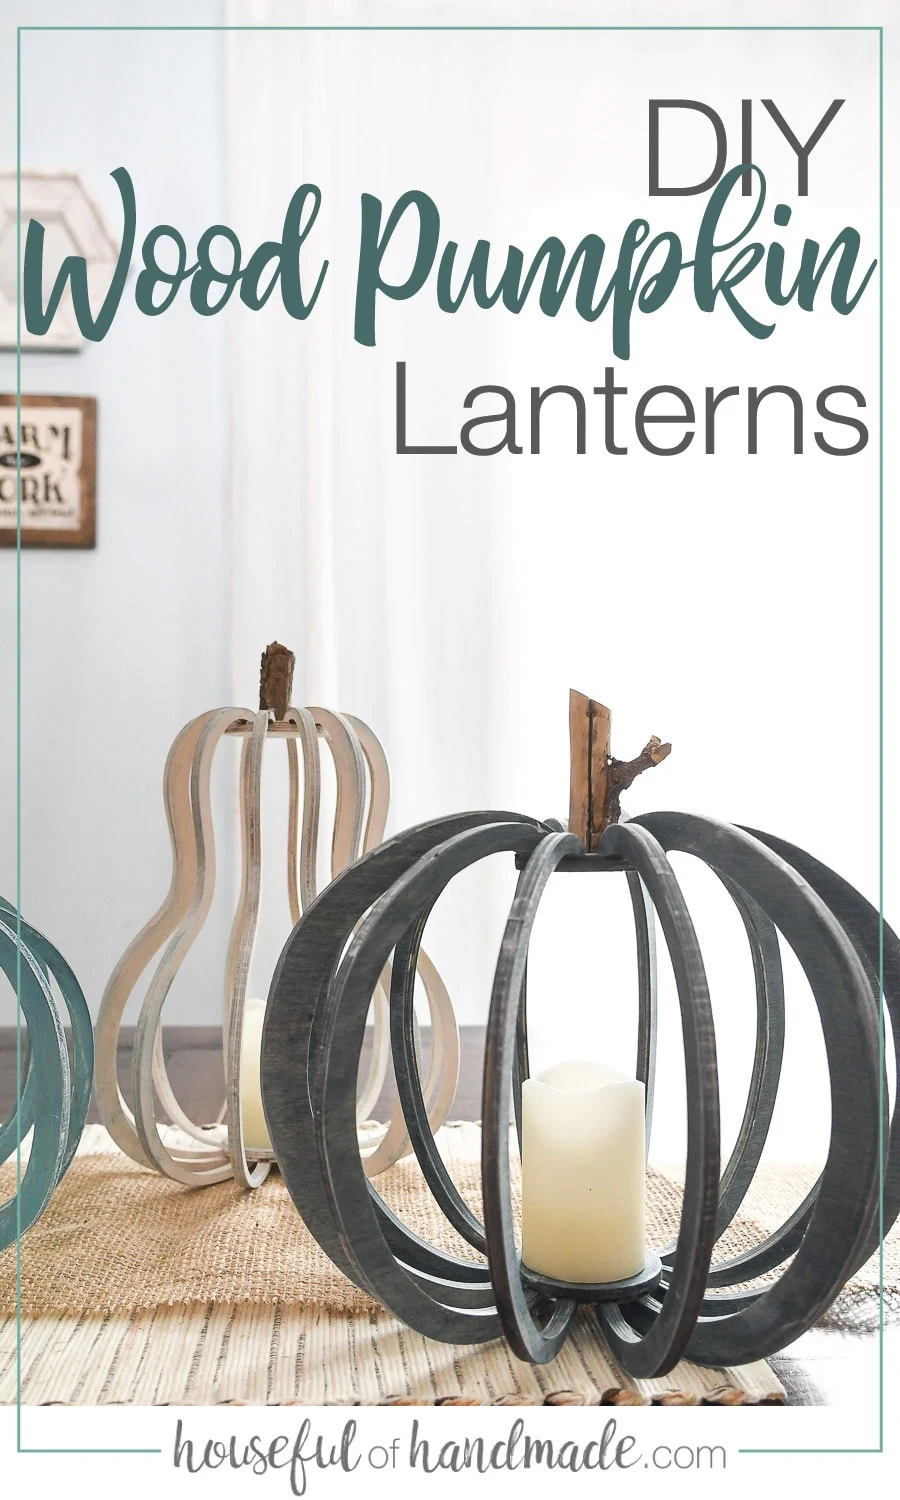 Picture of wood pumpkin lanterns on the table with words above it.